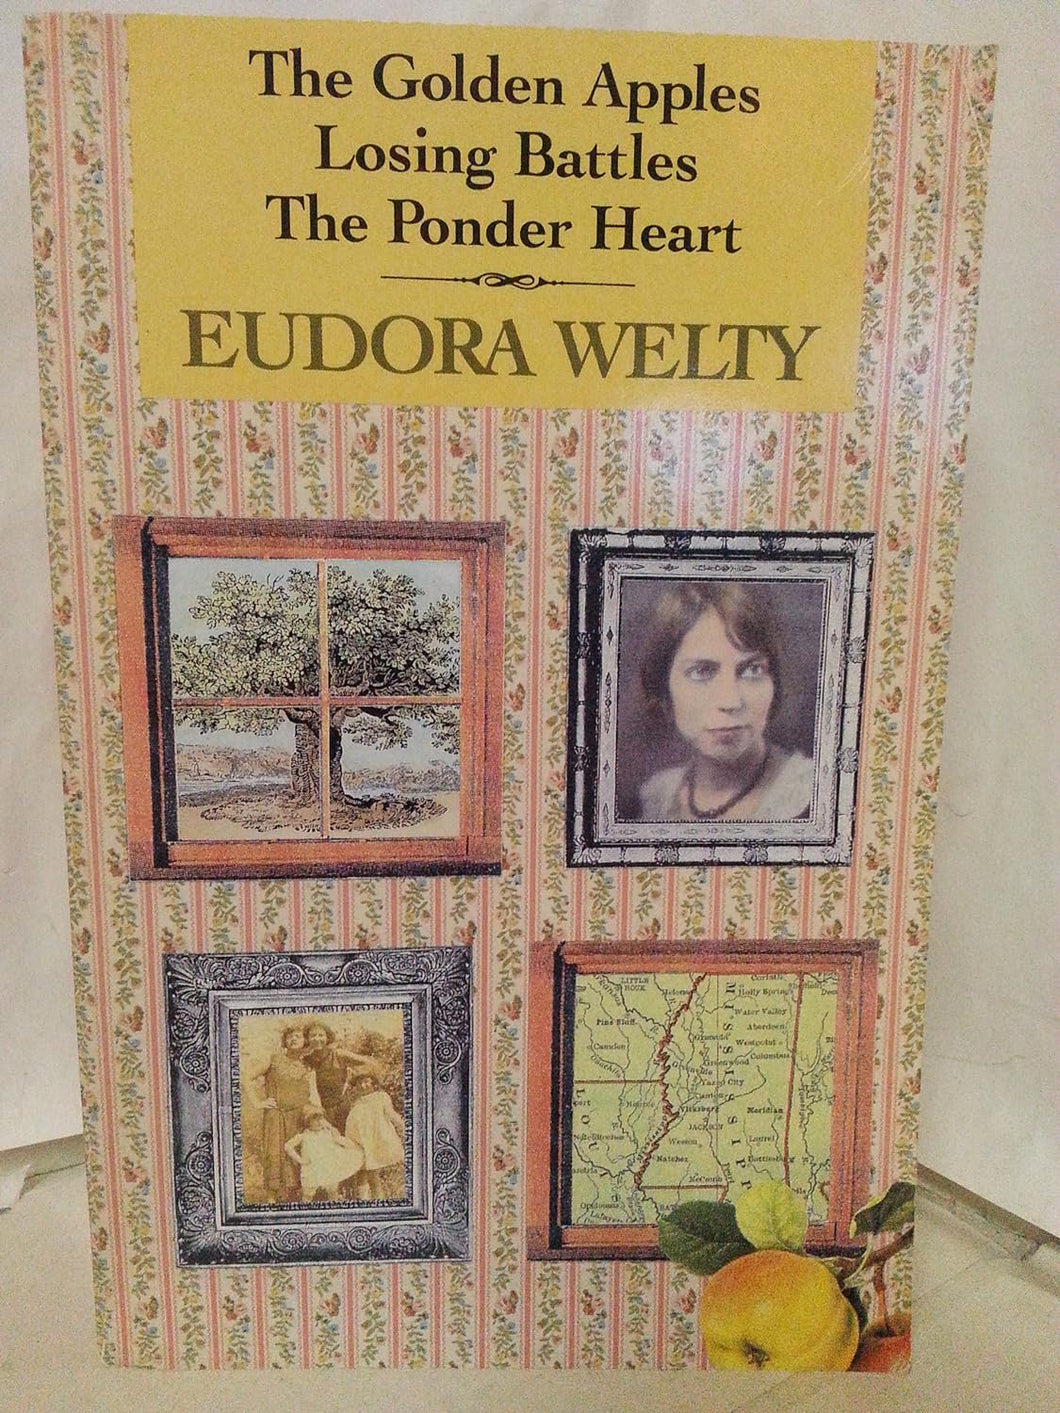 The Golden Apples/ Losing battles/ the Ponder Heart by Eudora Welty